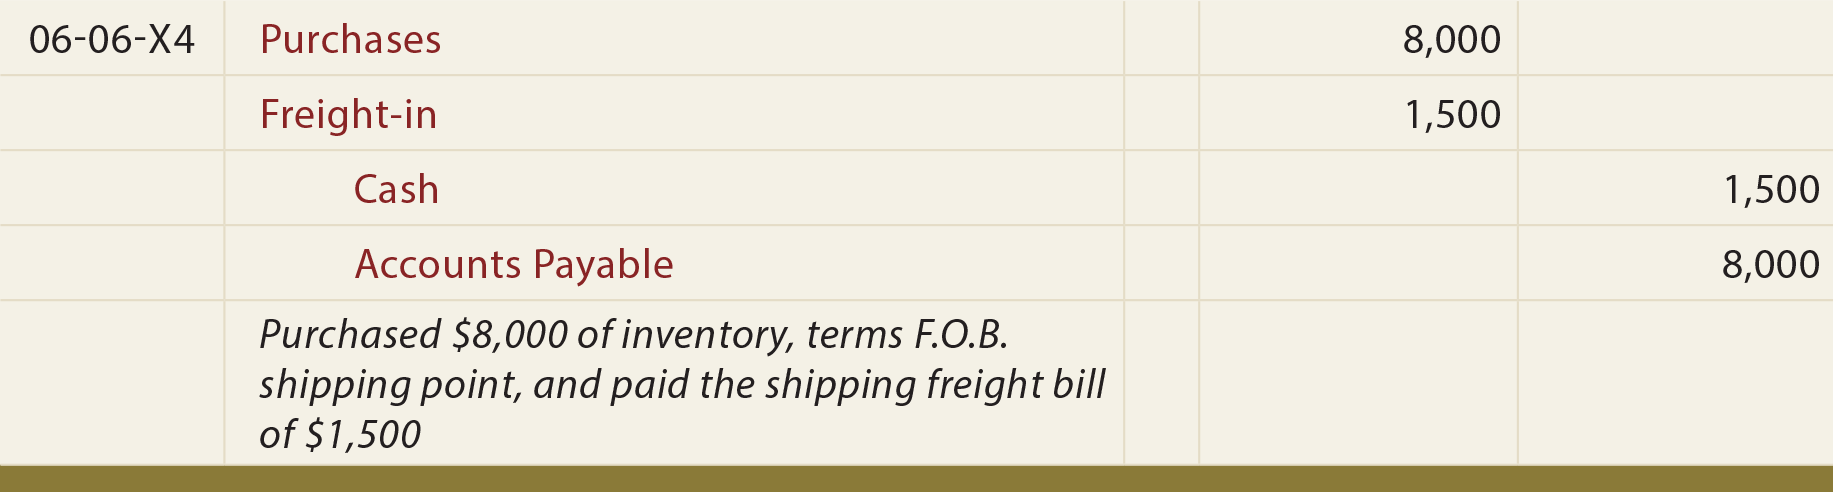 Freight General Journal Entry - F.O.B. shipping point